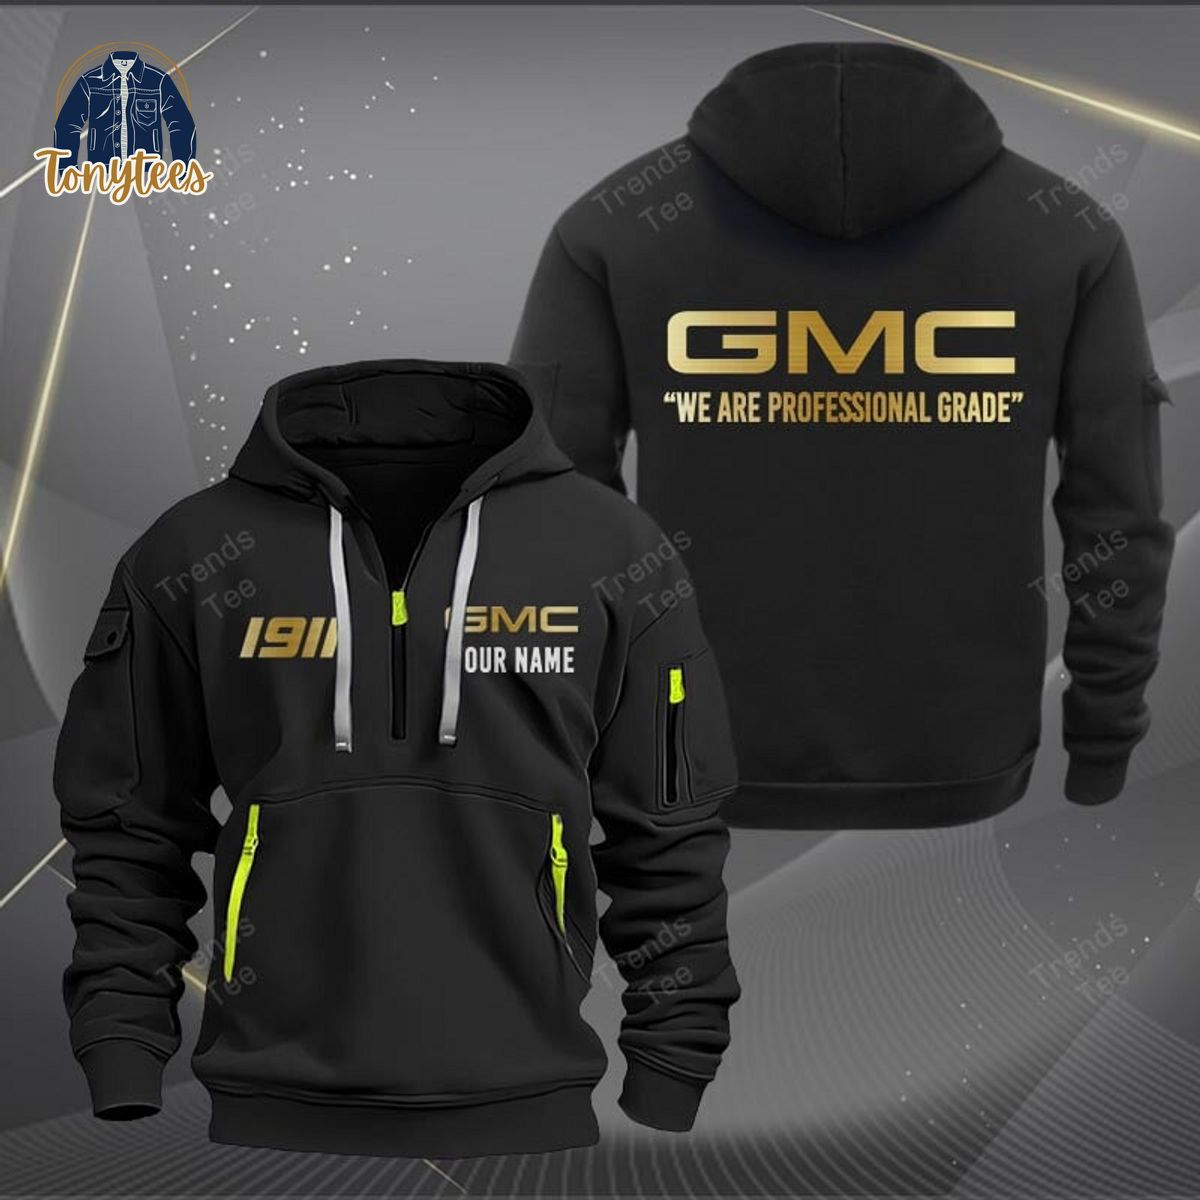 GMC We are professional grade Personalized Heavy Hoodie